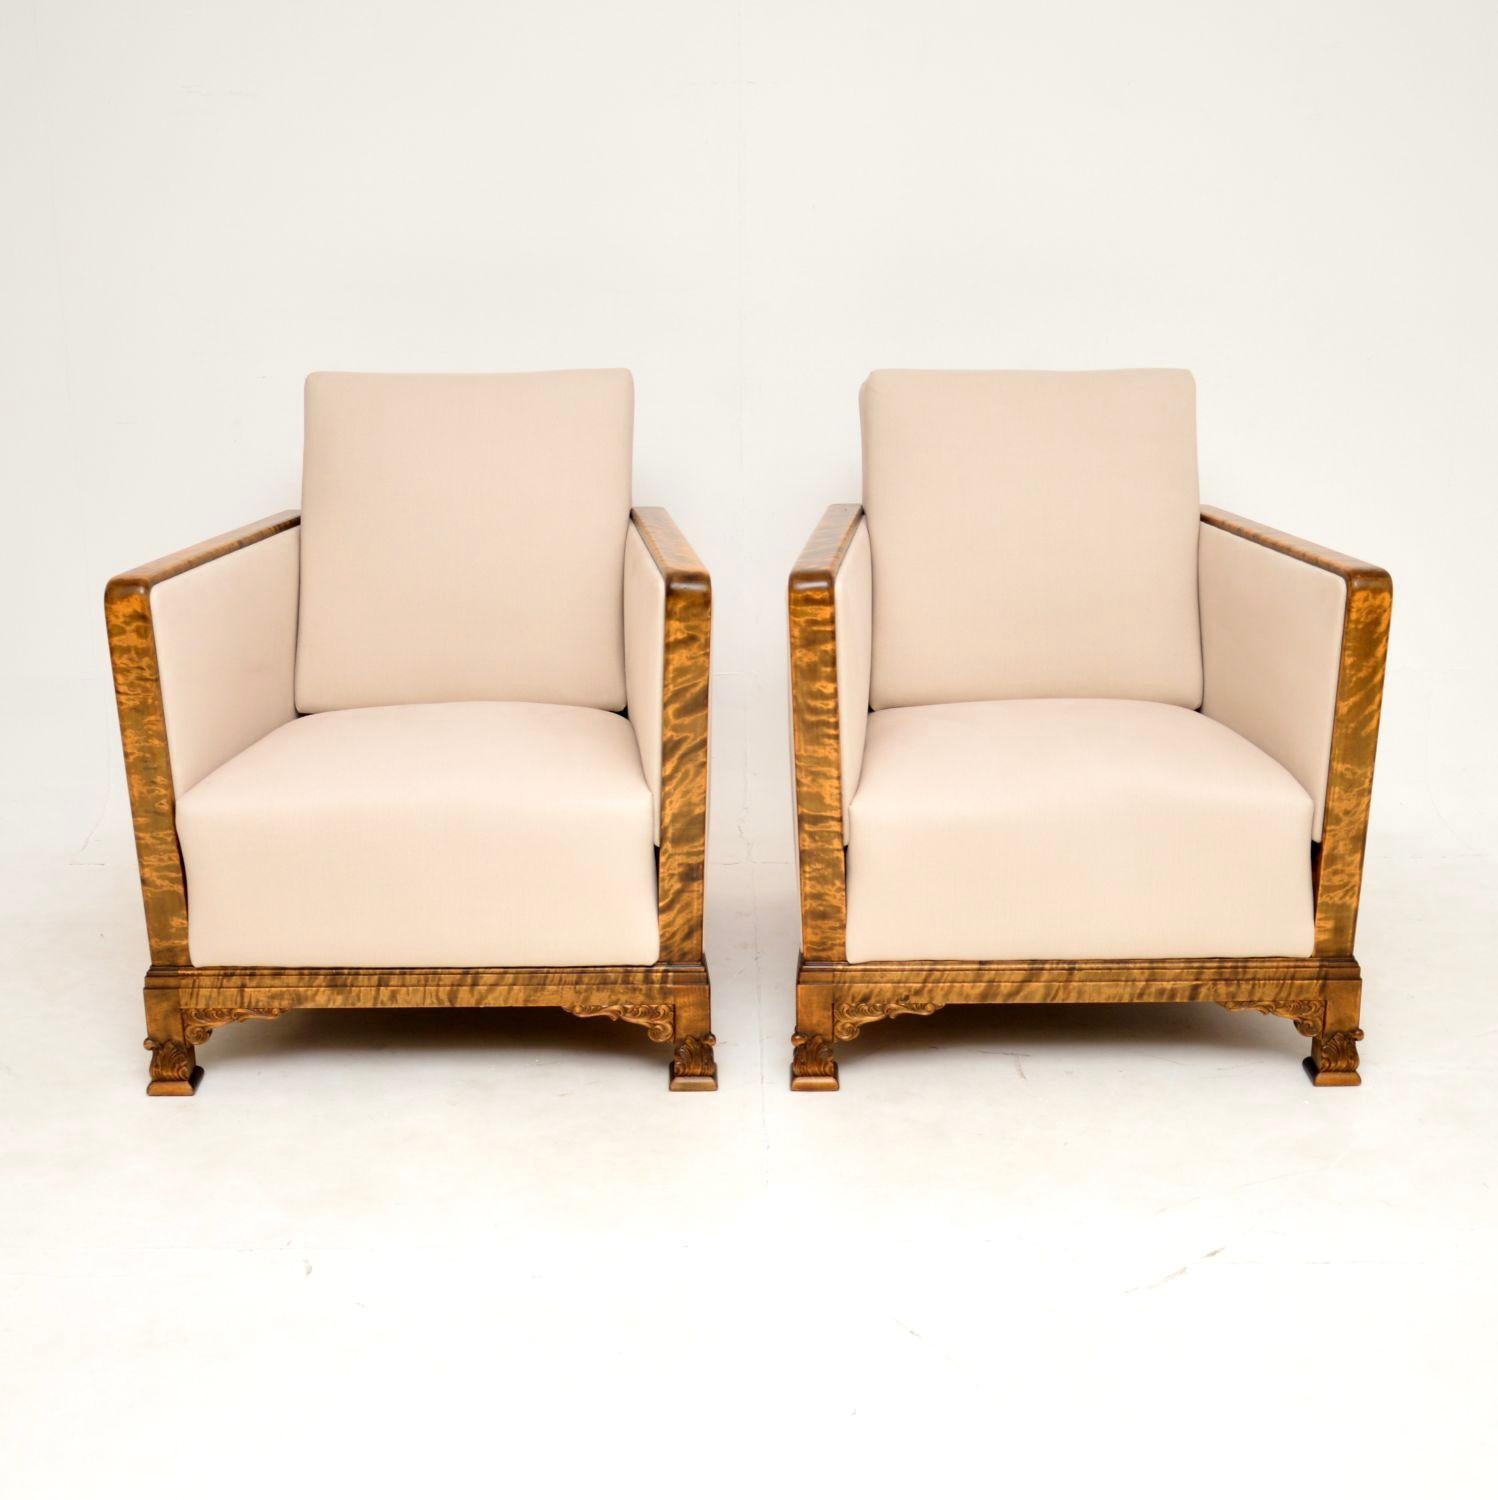 A stunning pair of original Swedish Art Deco period armchairs in satin birch. They were recently imported from Sweden, they date from the 1920-30’s.

They have a gorgeous design, and the quality is outstanding. The satin birch frames have beautiful